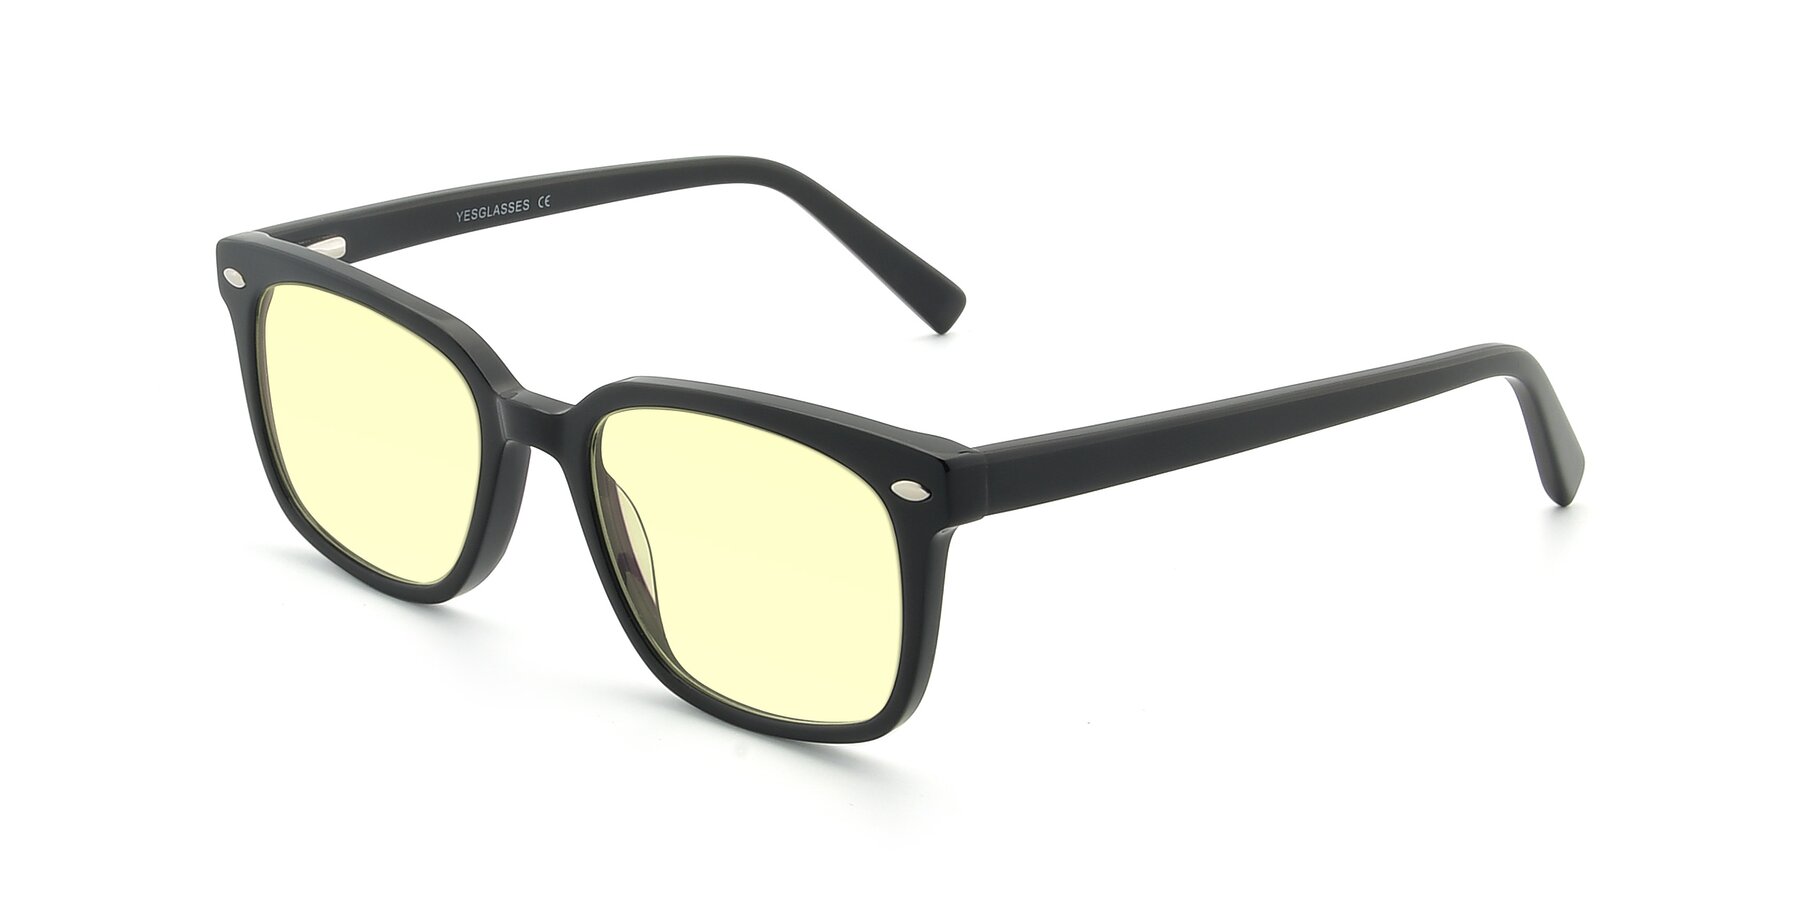 Angle of 17349 in Black with Light Yellow Tinted Lenses